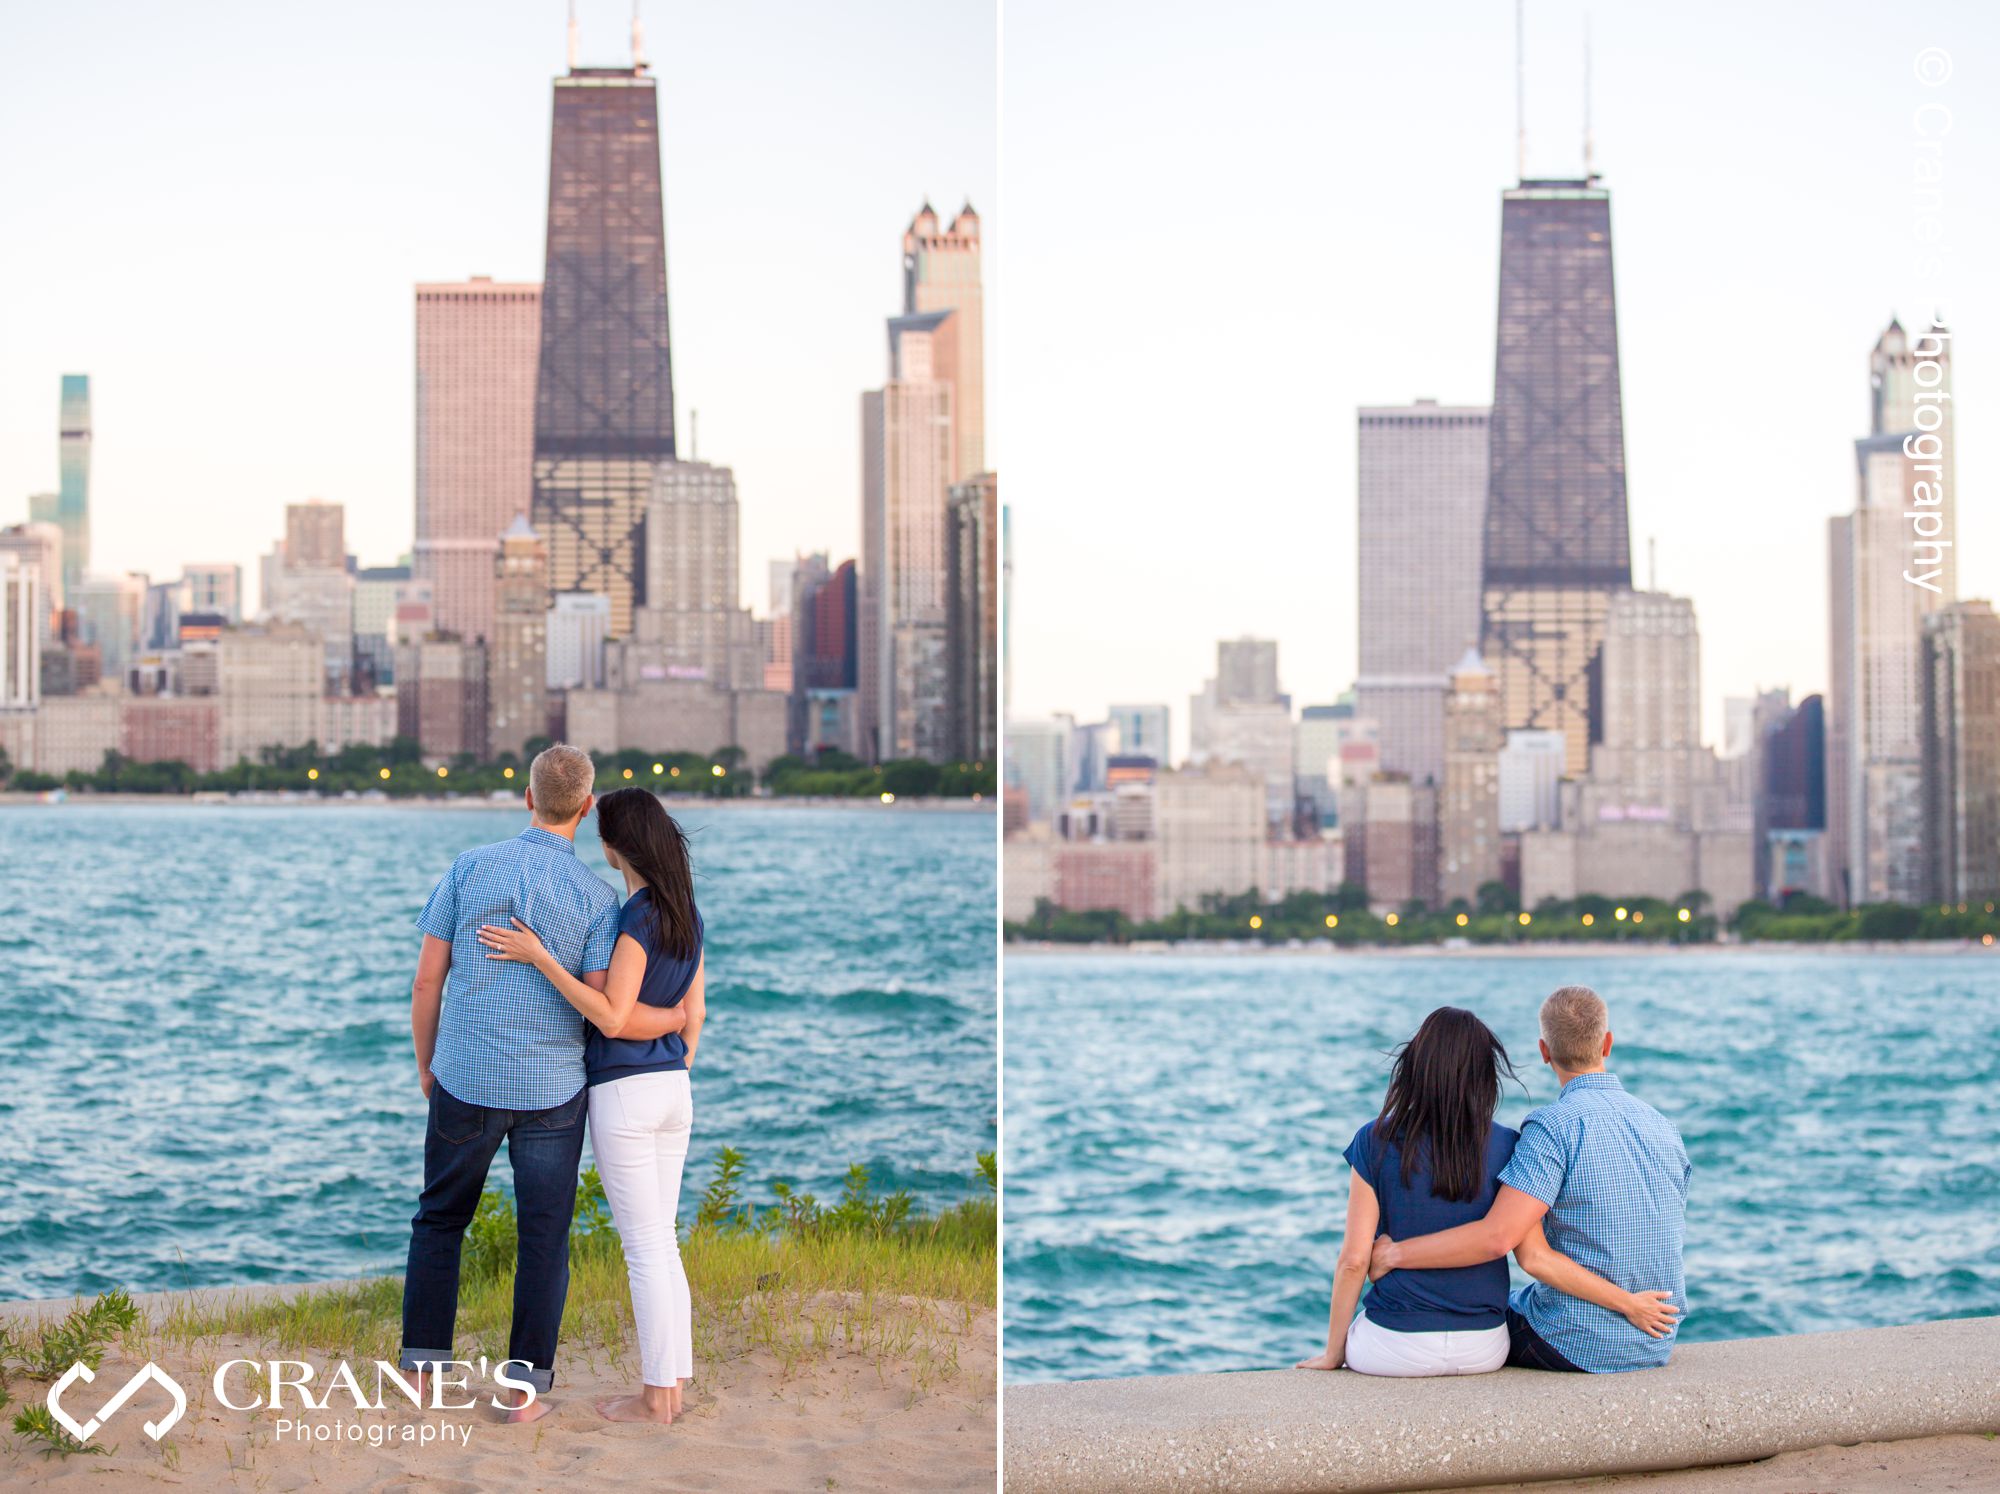 A summer engagement photo with the skyline of Chicago glowing in the background